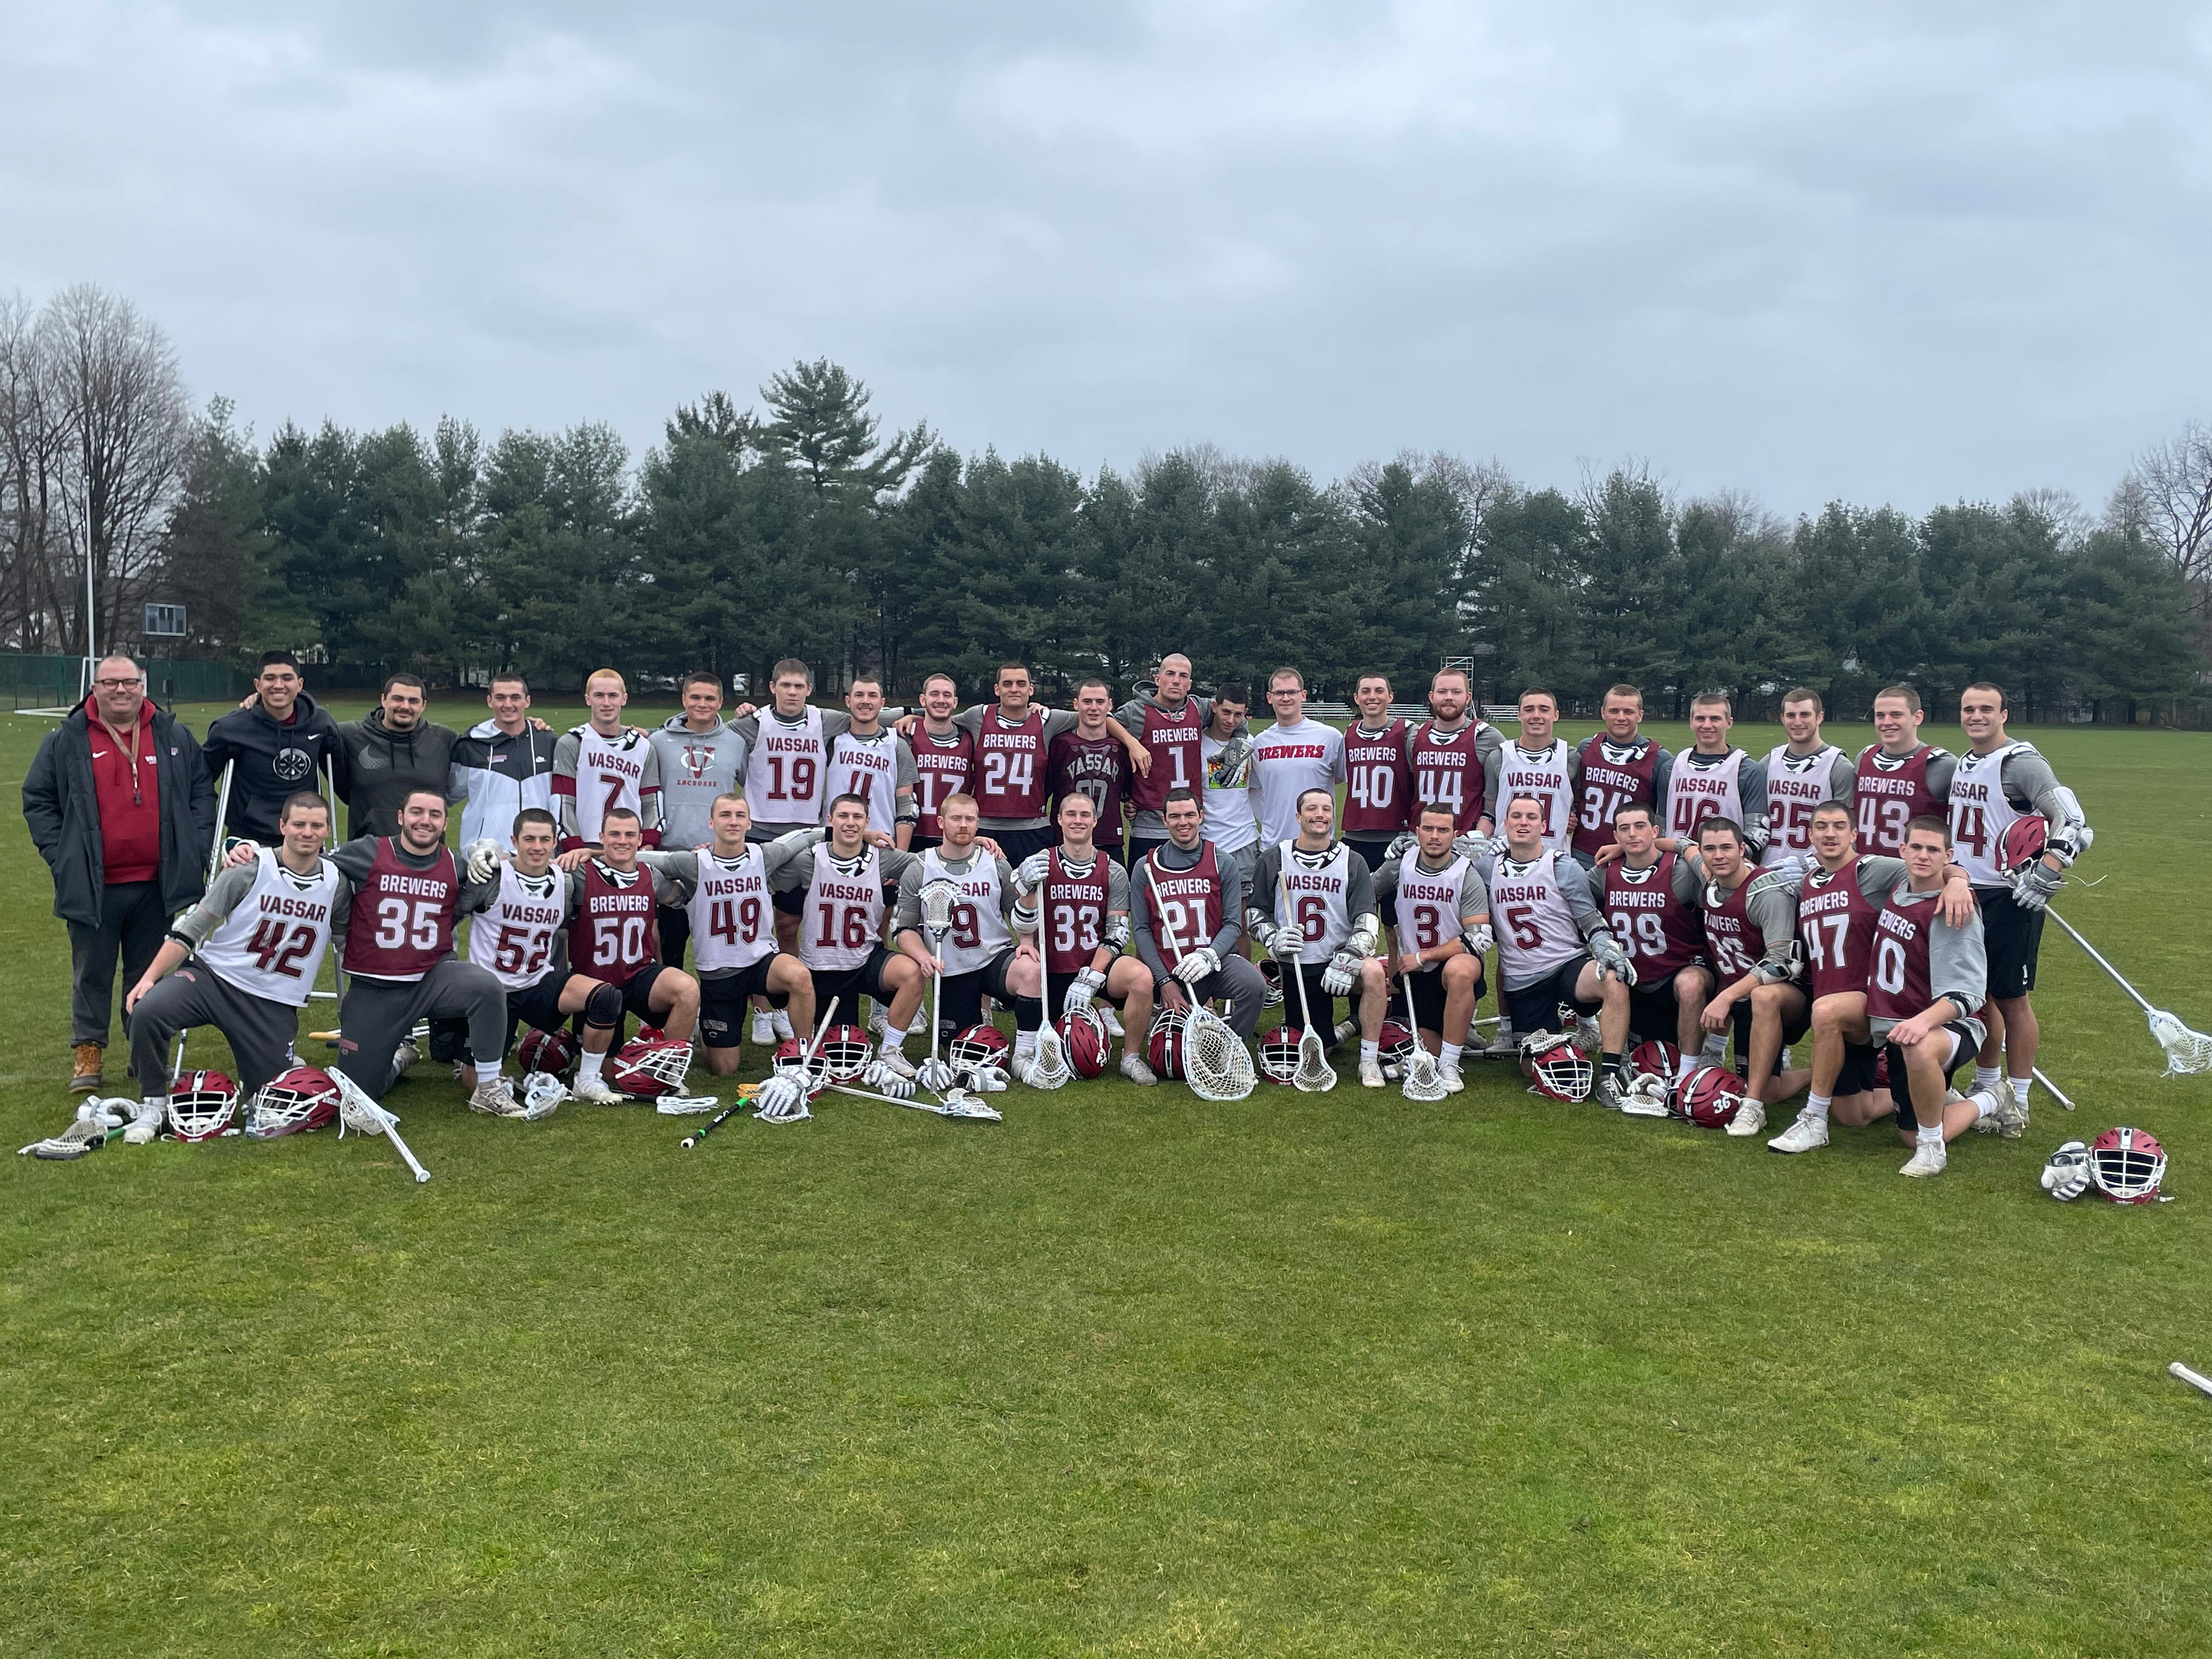 the men's lacrosse team posing with shaved heads in an outdoor group photo